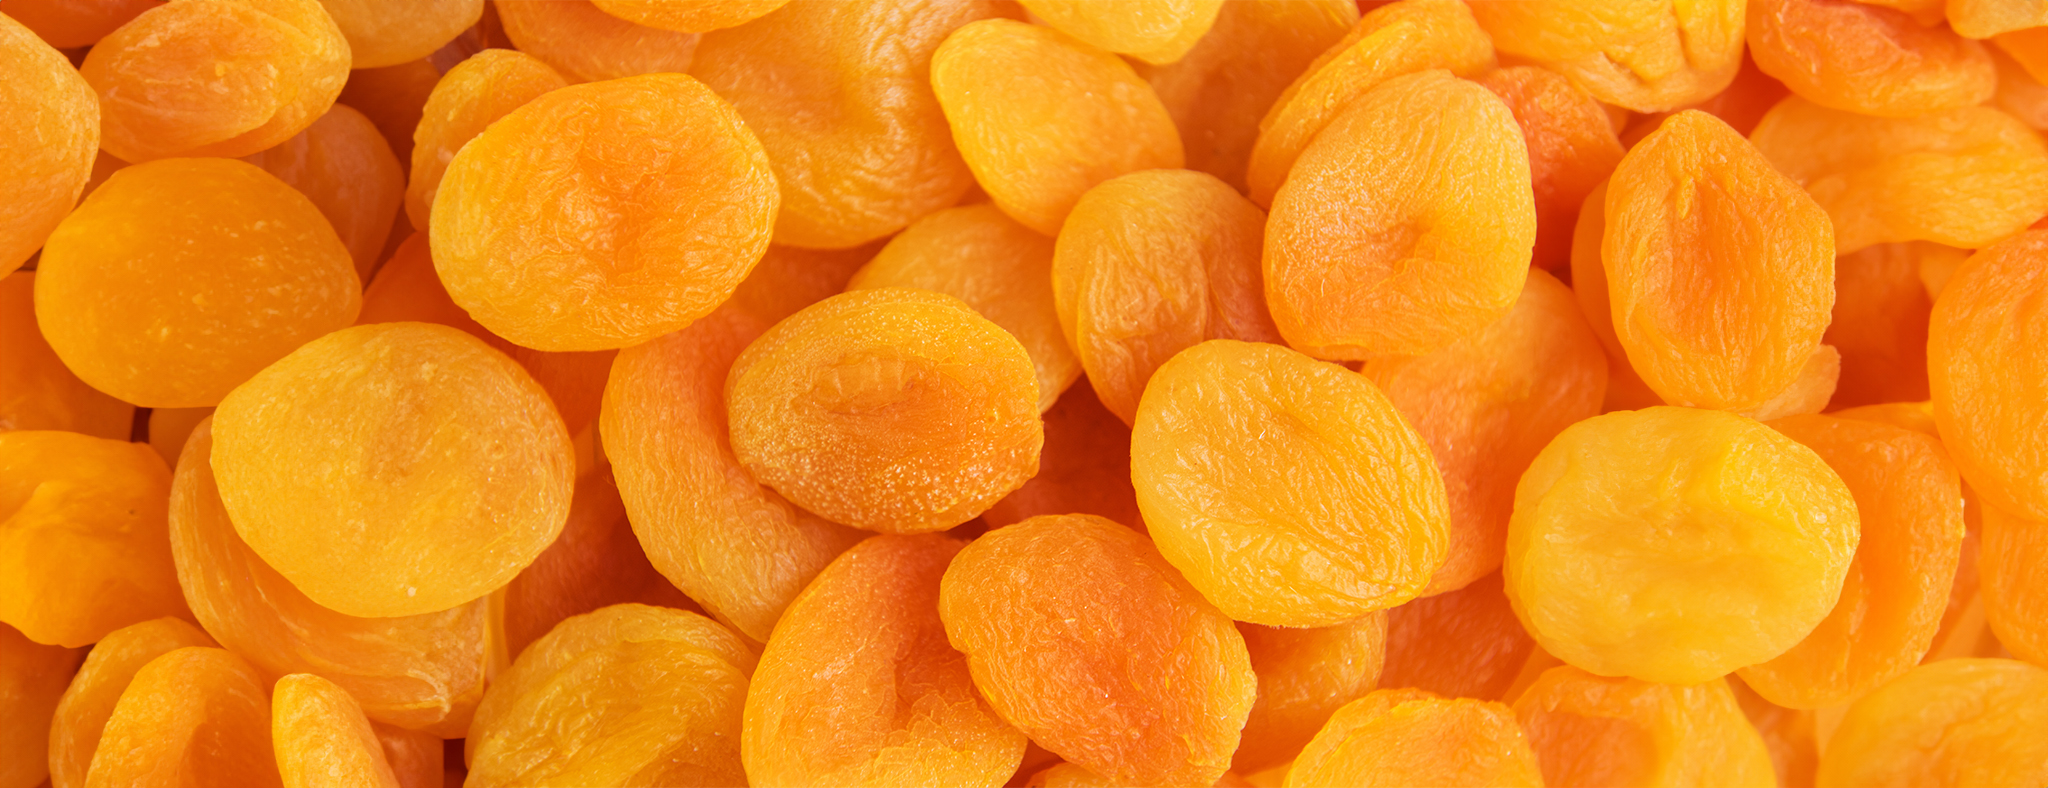 Wholesale dried apricots in bulk from Turkey